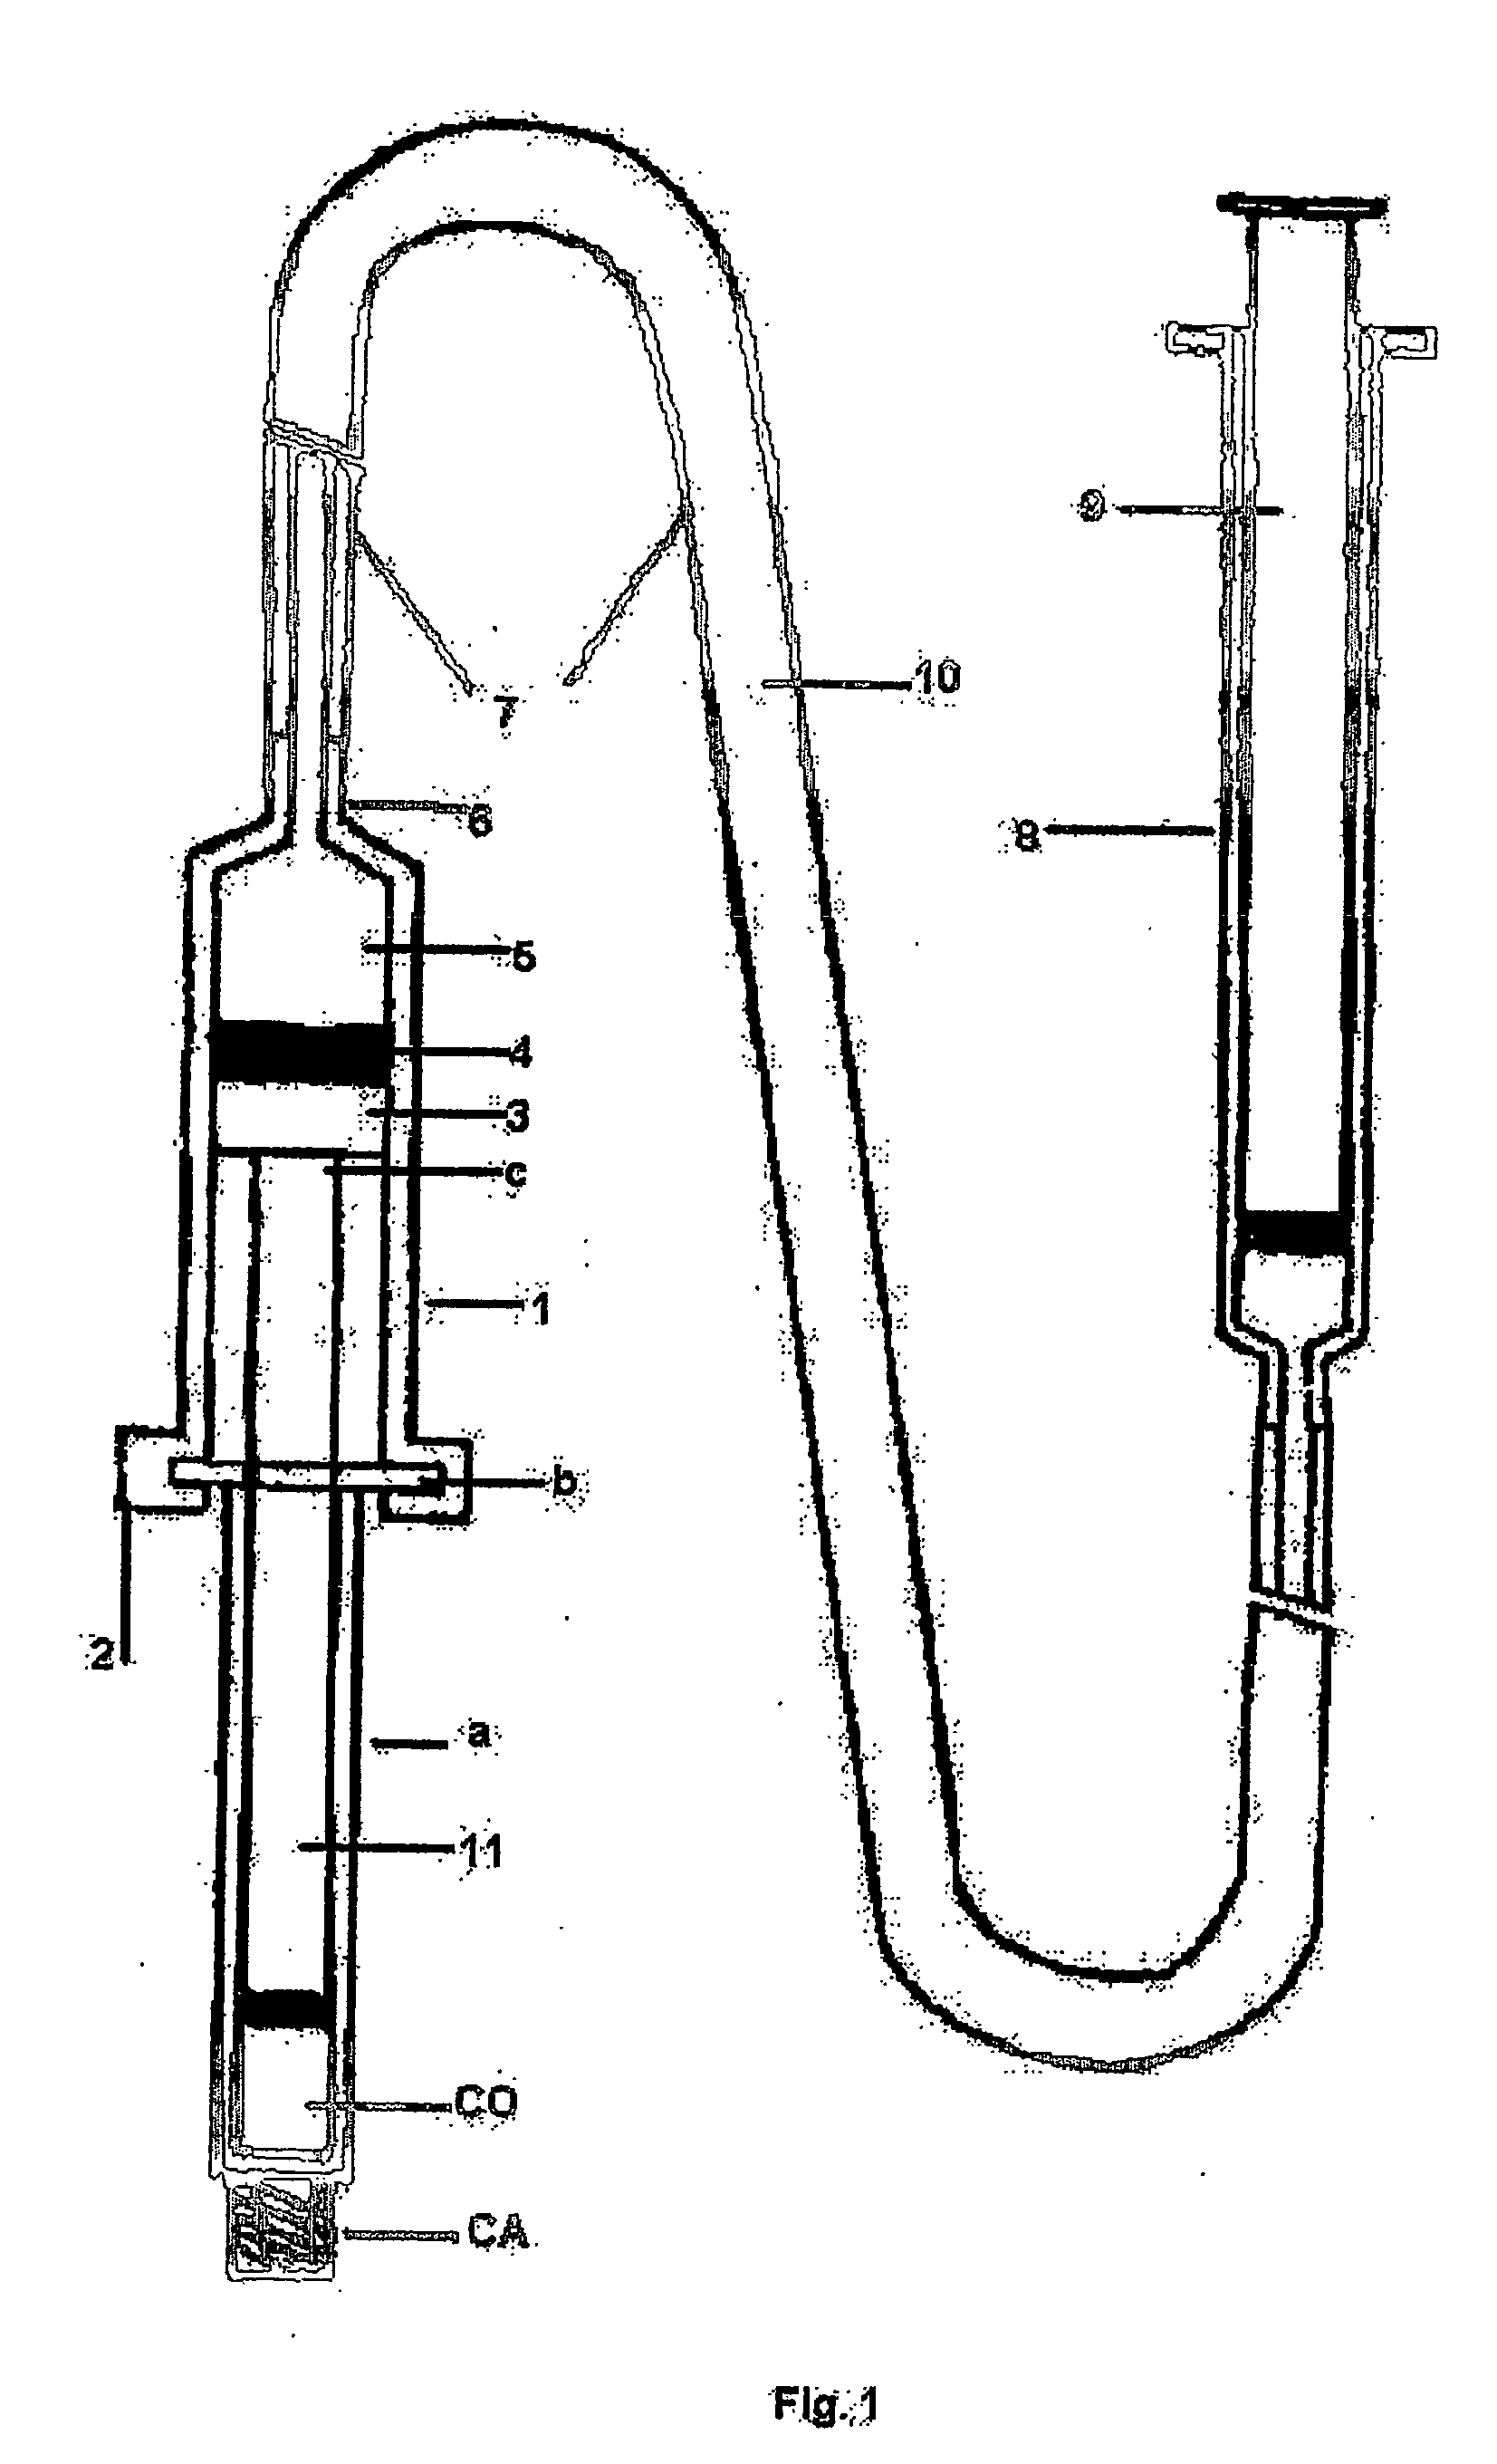 Hydraulic device for the injection of bone cement in percutaneous vertebroplasty